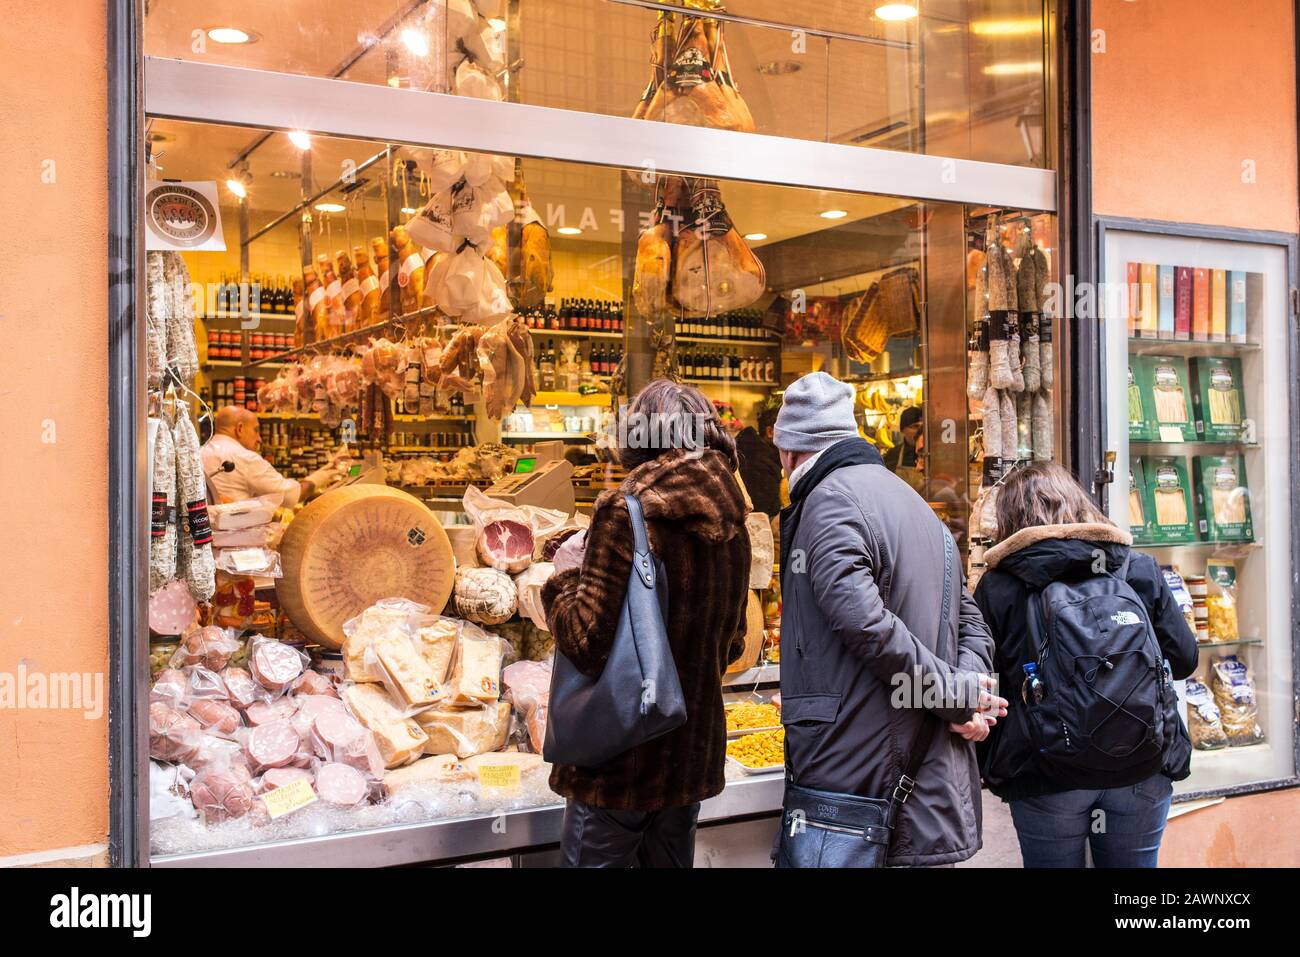 Bologna, Italy - December 2019: People looking at shop window with typical Italian food in Via Pescherie Vecchie, a famous alley full of traditional s Stock Photo